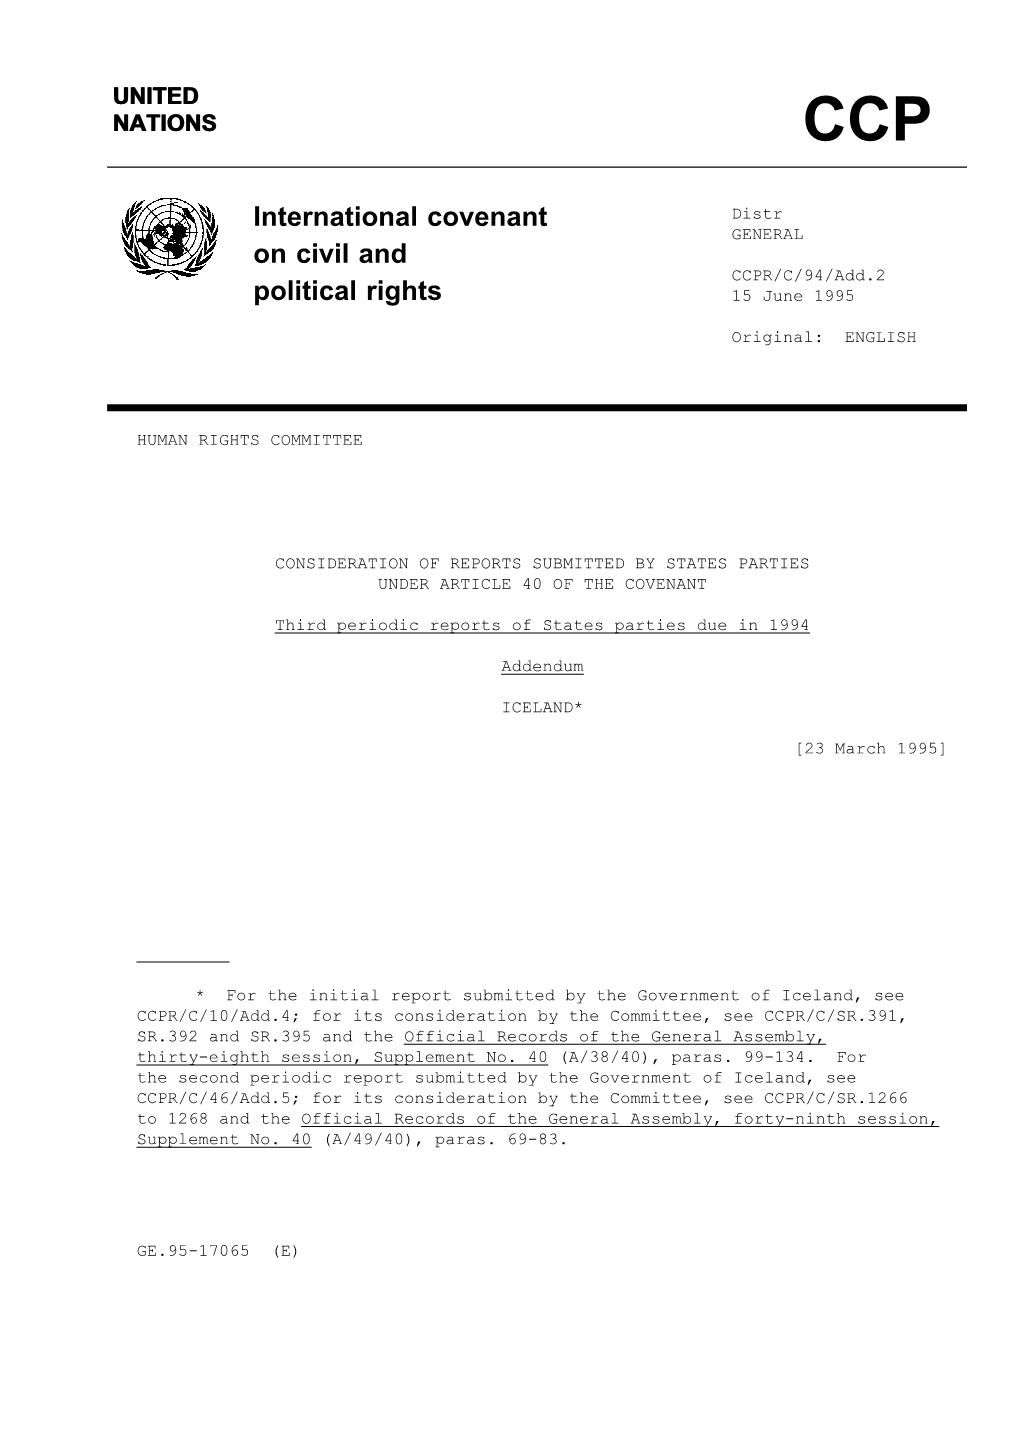 International Covenant on Civil and Political Rights (ICCPR) Was Compiled in the Autumn of 1992